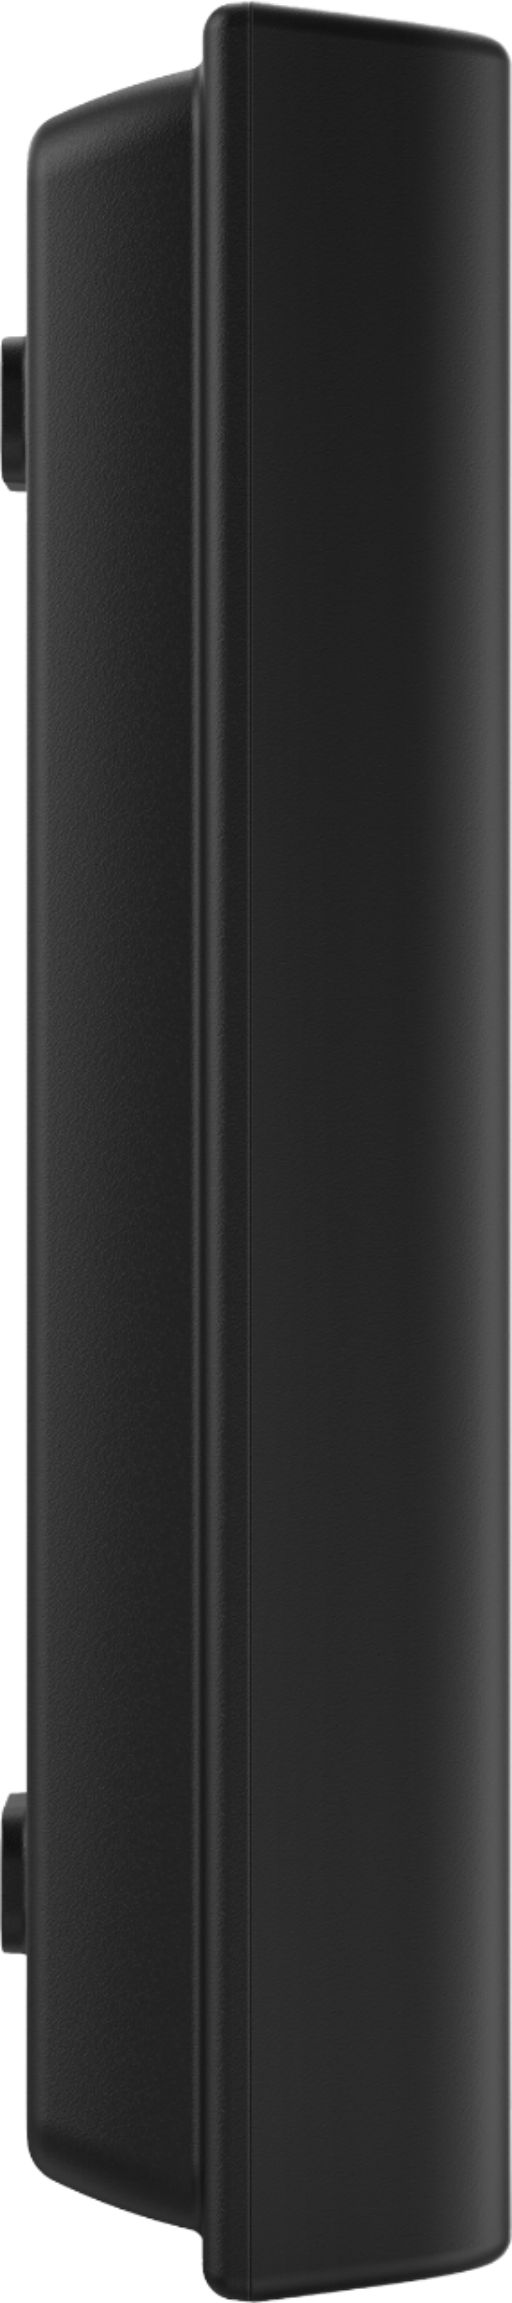 Angle View: eufy Security - Smart Wi-Fi Add On Video Doorbell 2K - Black